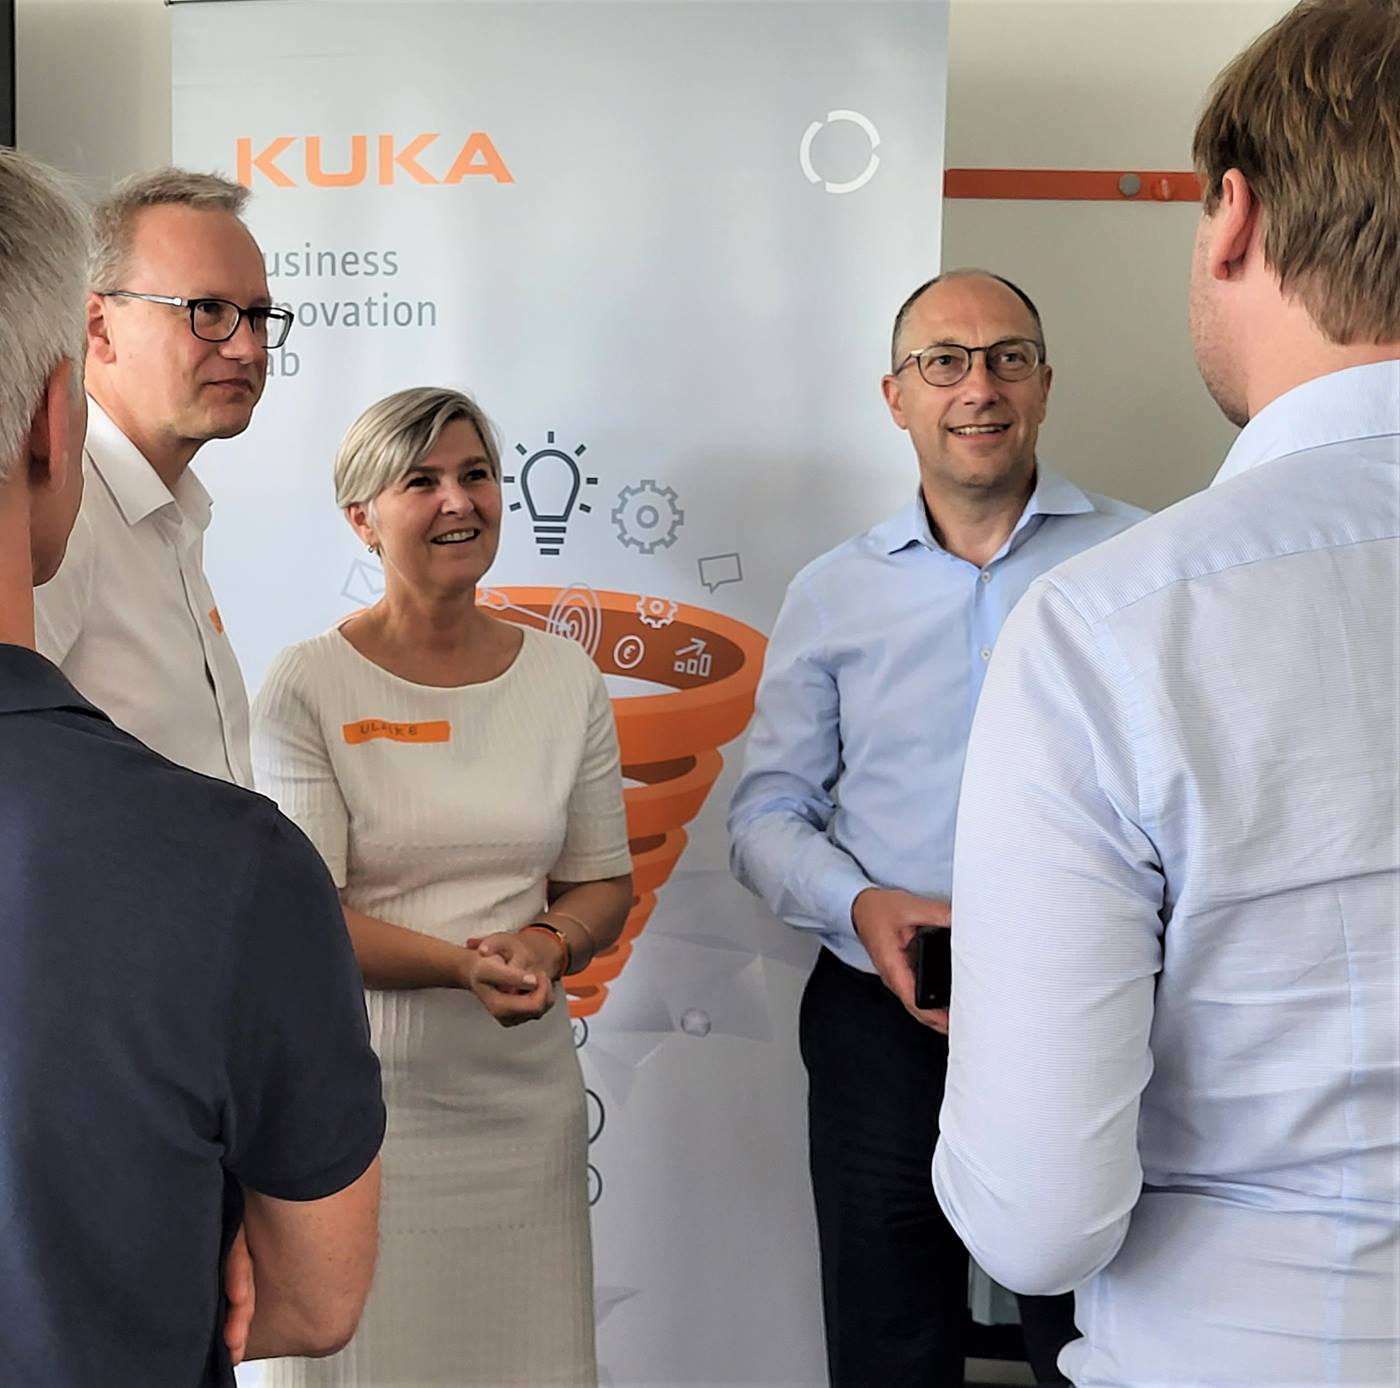 Dr. Ulrike Tagscherer, Chief Innovation Officer at KUKA and Peter Mohnen, CEO of KUKA AG in conversation with Augsburg Startups. 